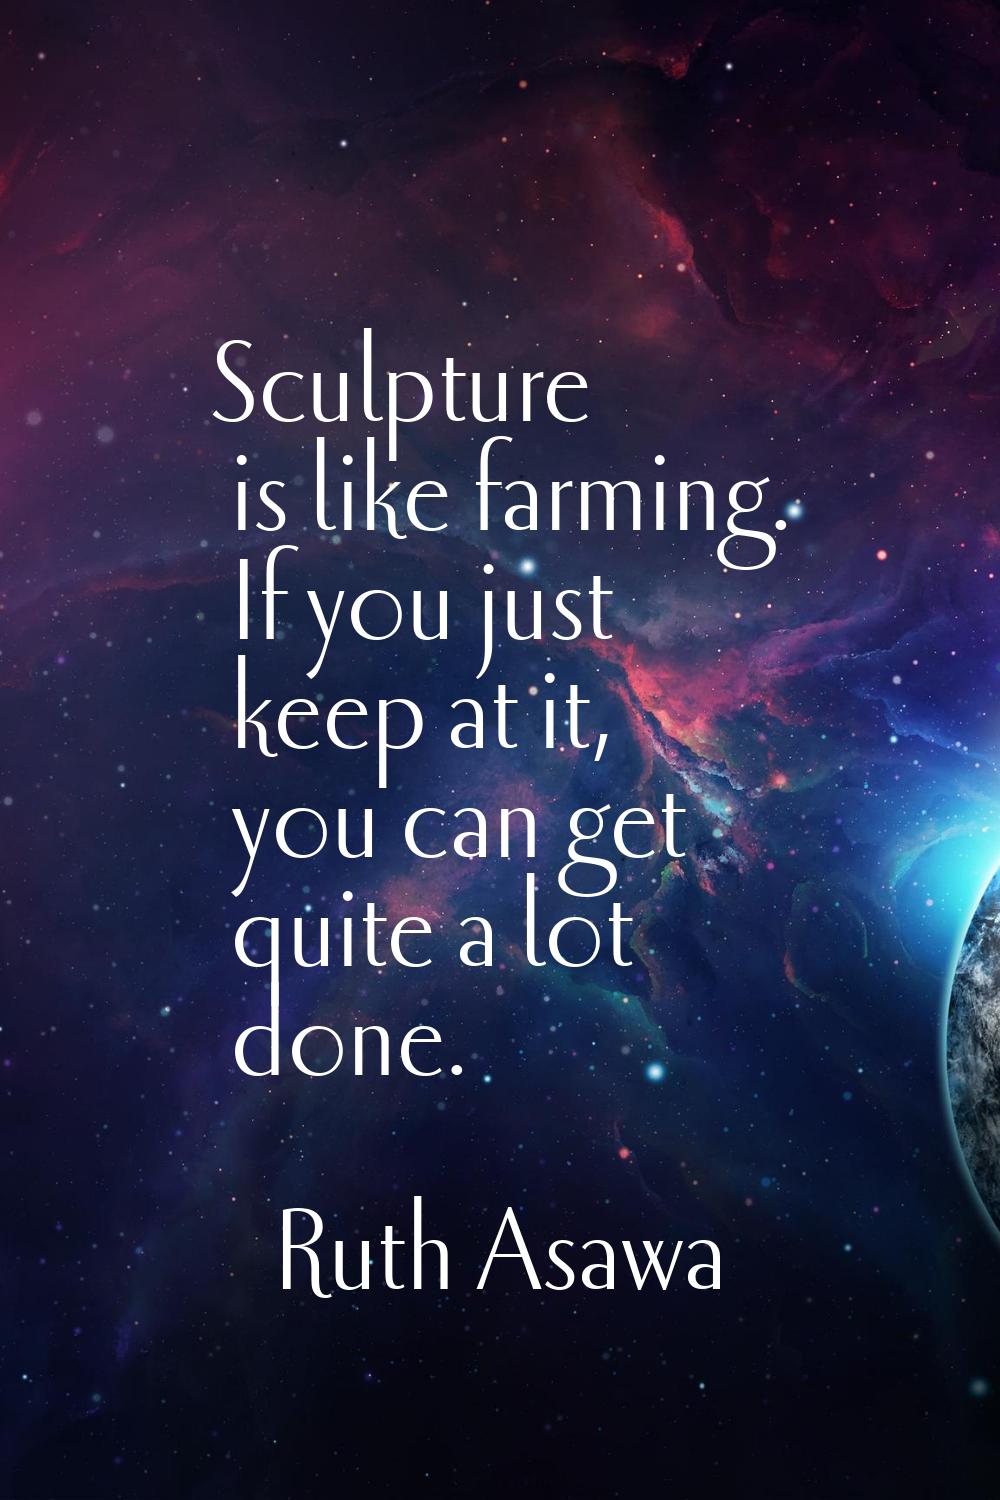 Sculpture is like farming. If you just keep at it, you can get quite a lot done.